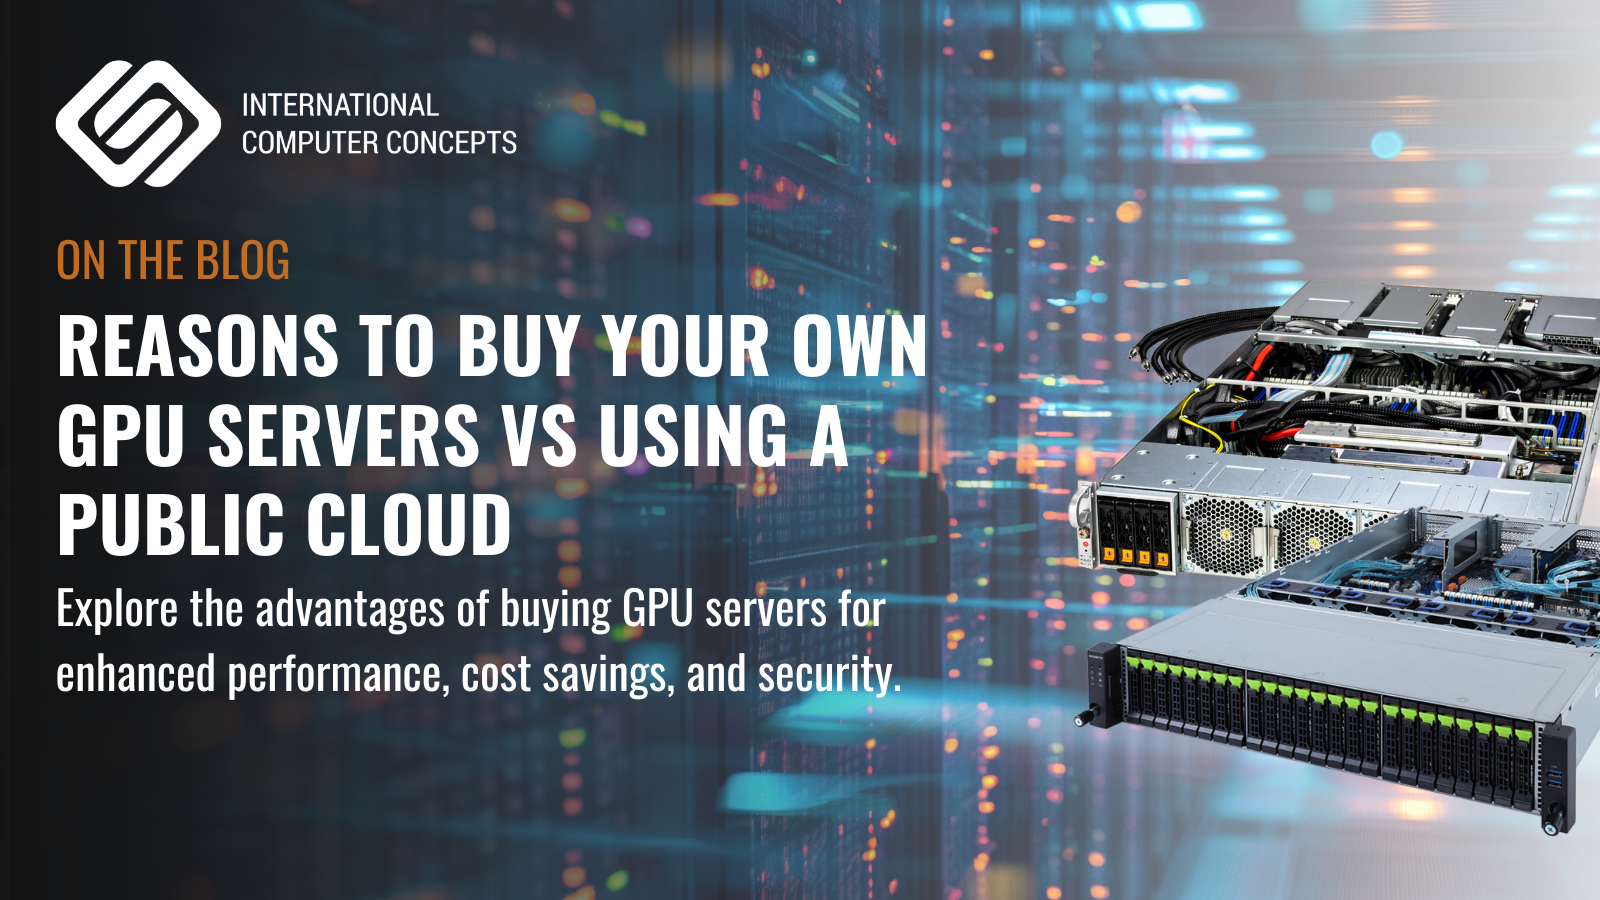 Reasons to Buy Your Own GPU Servers vs. Using a Public Cloud